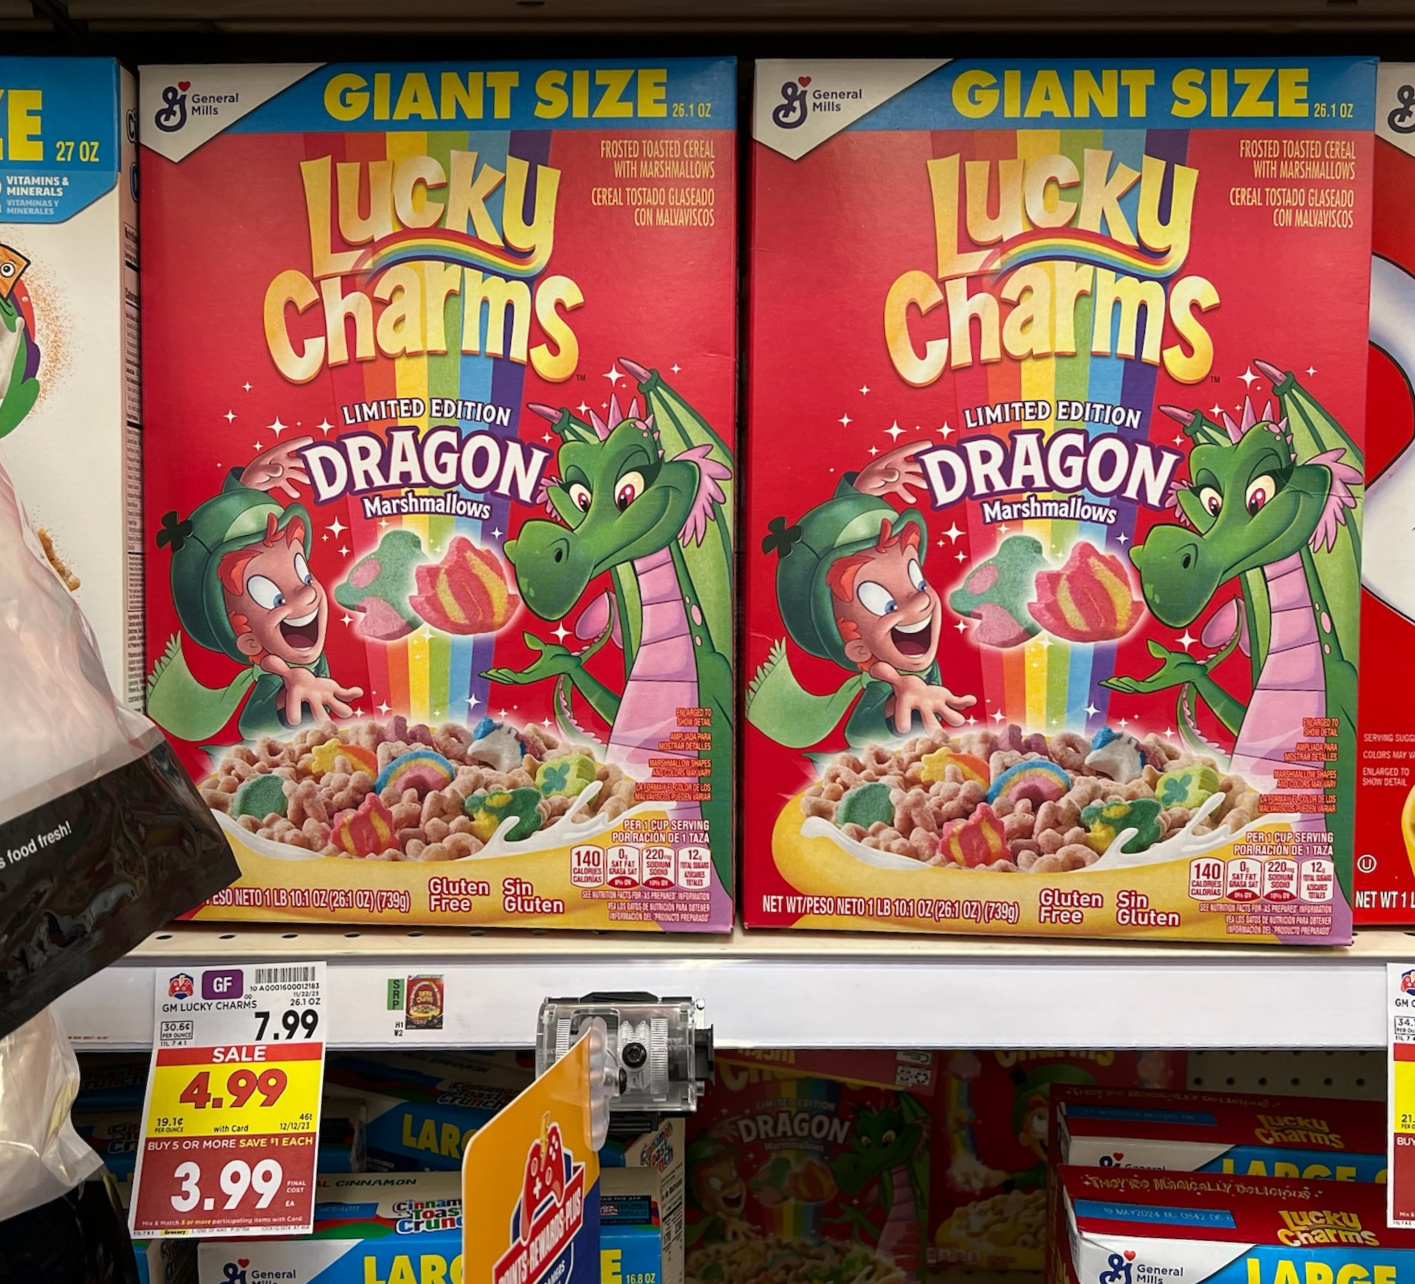 Giant Size Boxes Of General Mills Cereal As Low As $3.24 At Kroger